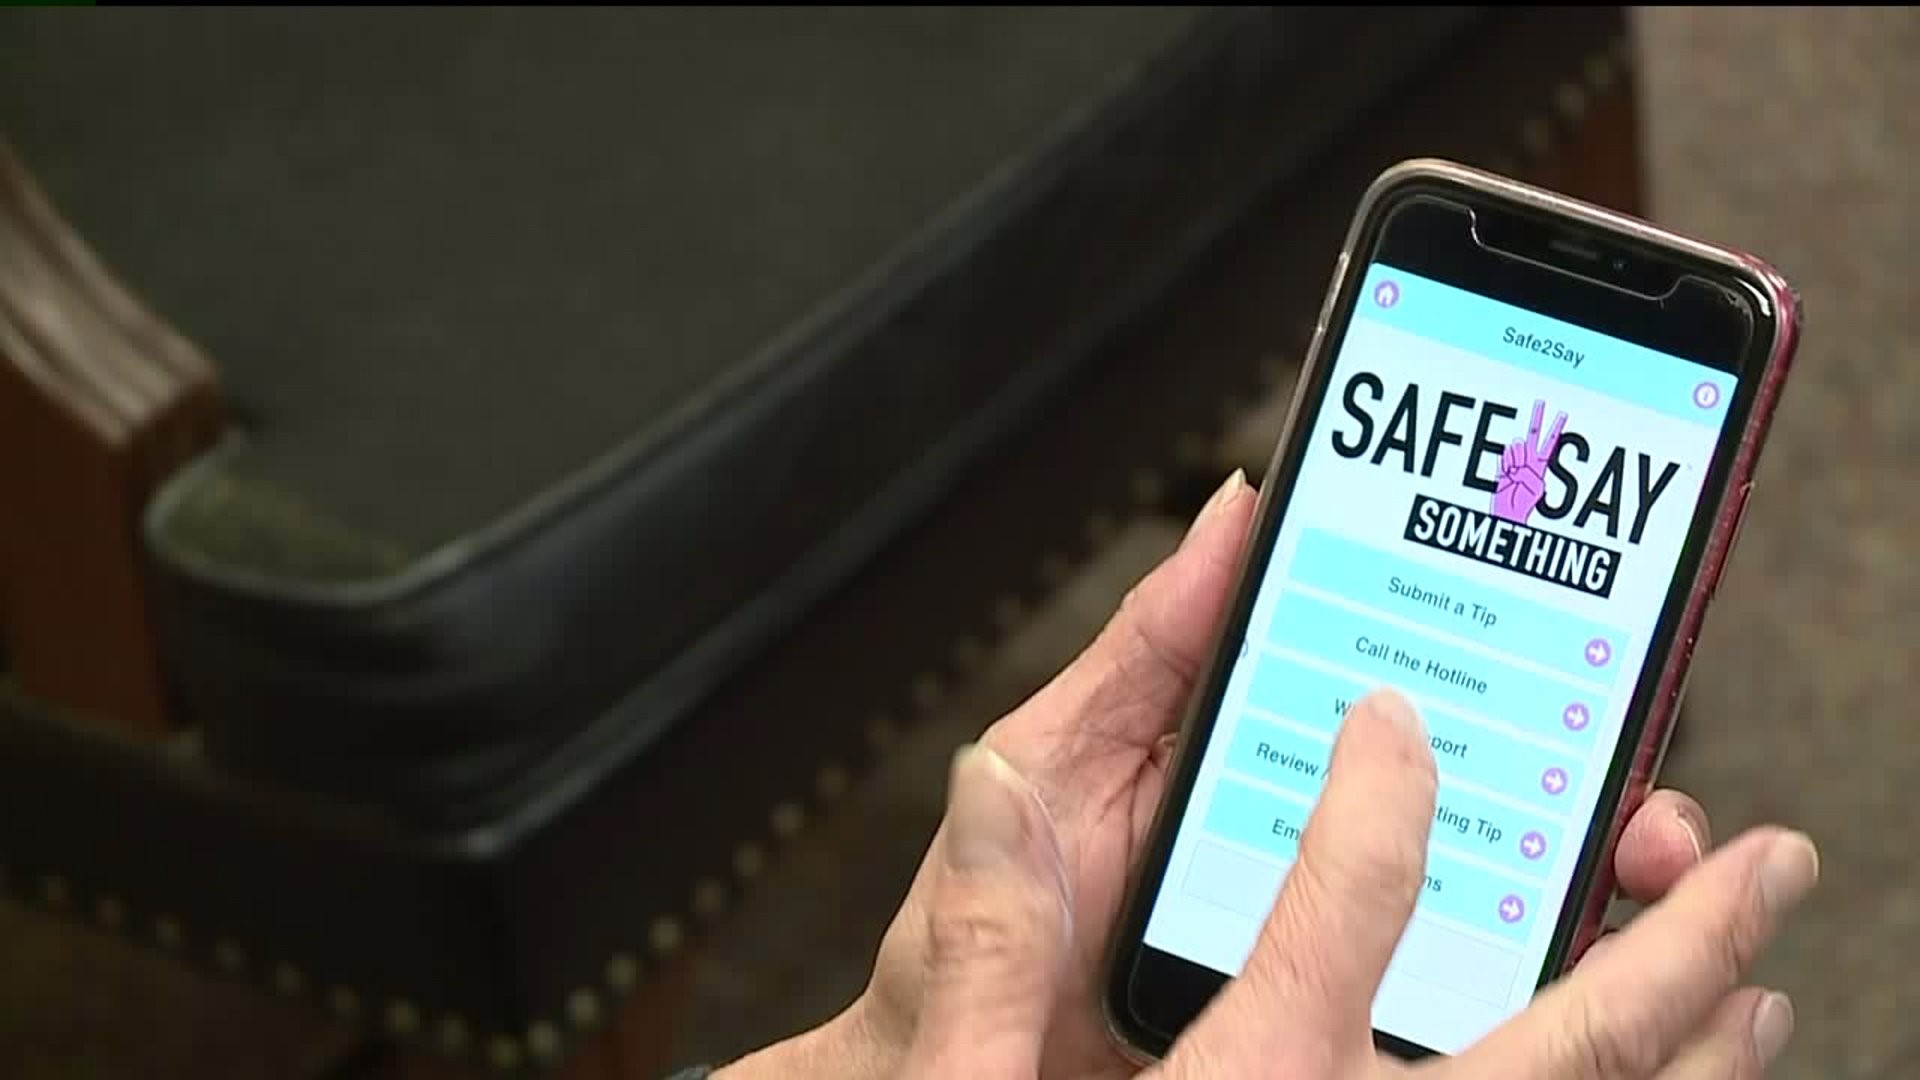 'Safe 2 Say Something' App Adds Extra Protection for Students